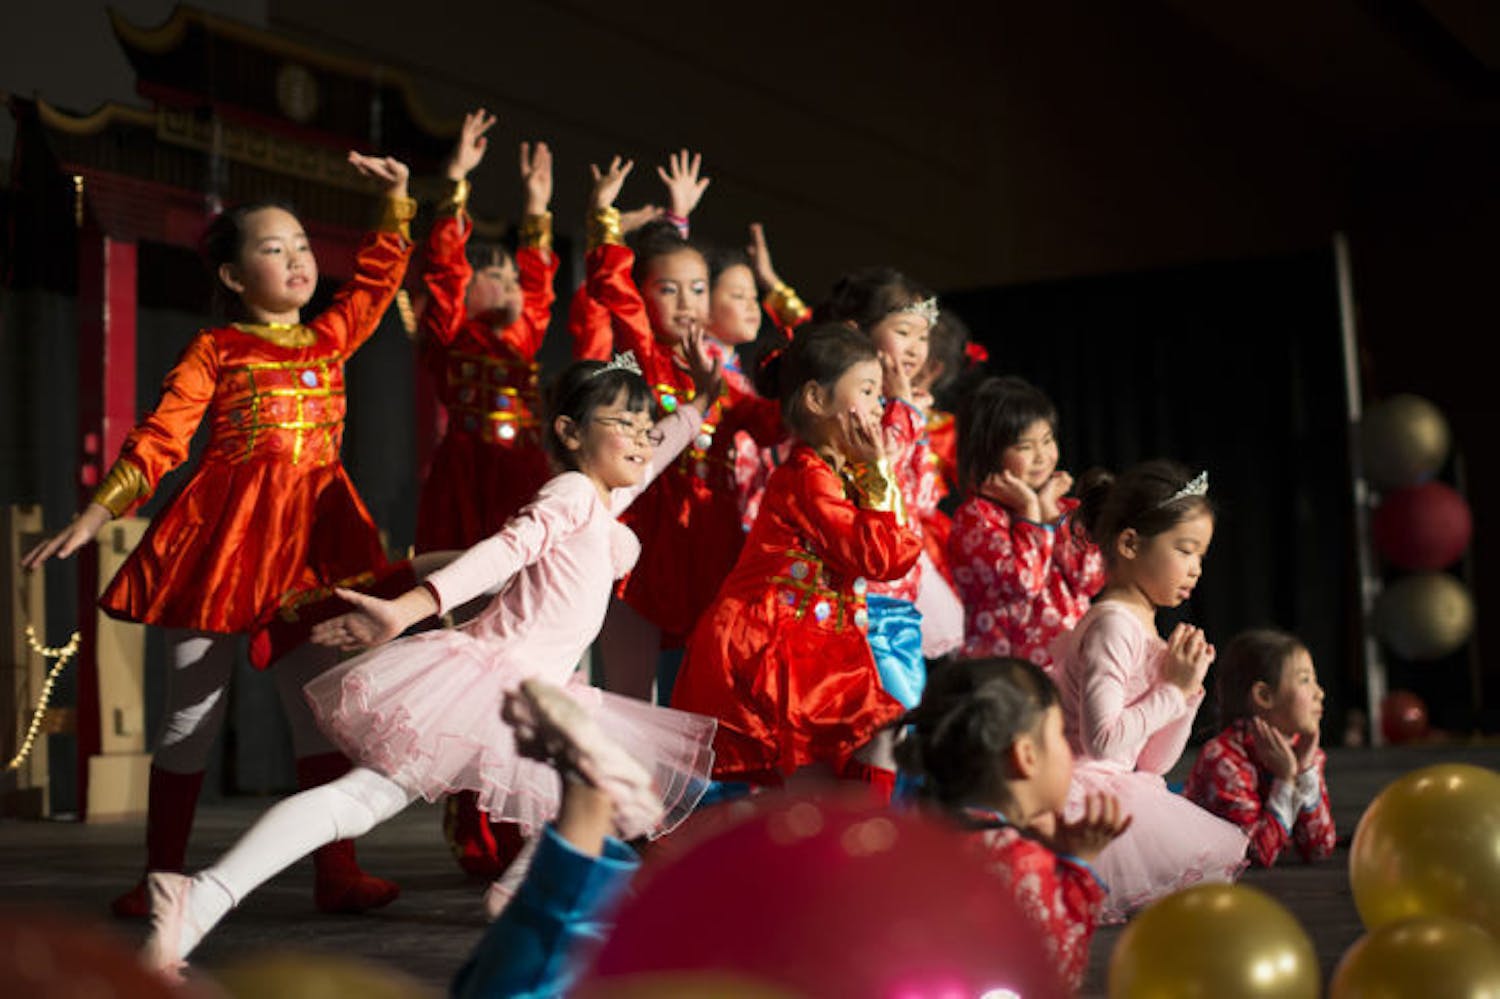 Children aged 5 to 7 from the Hua-Gen Chinese School perform during the Spring Festival Gala at the Reitz Union Grand Ballroom on Sunday night. The event is hosted by the Chinese Student Association in celebration of the Chinese New Year.